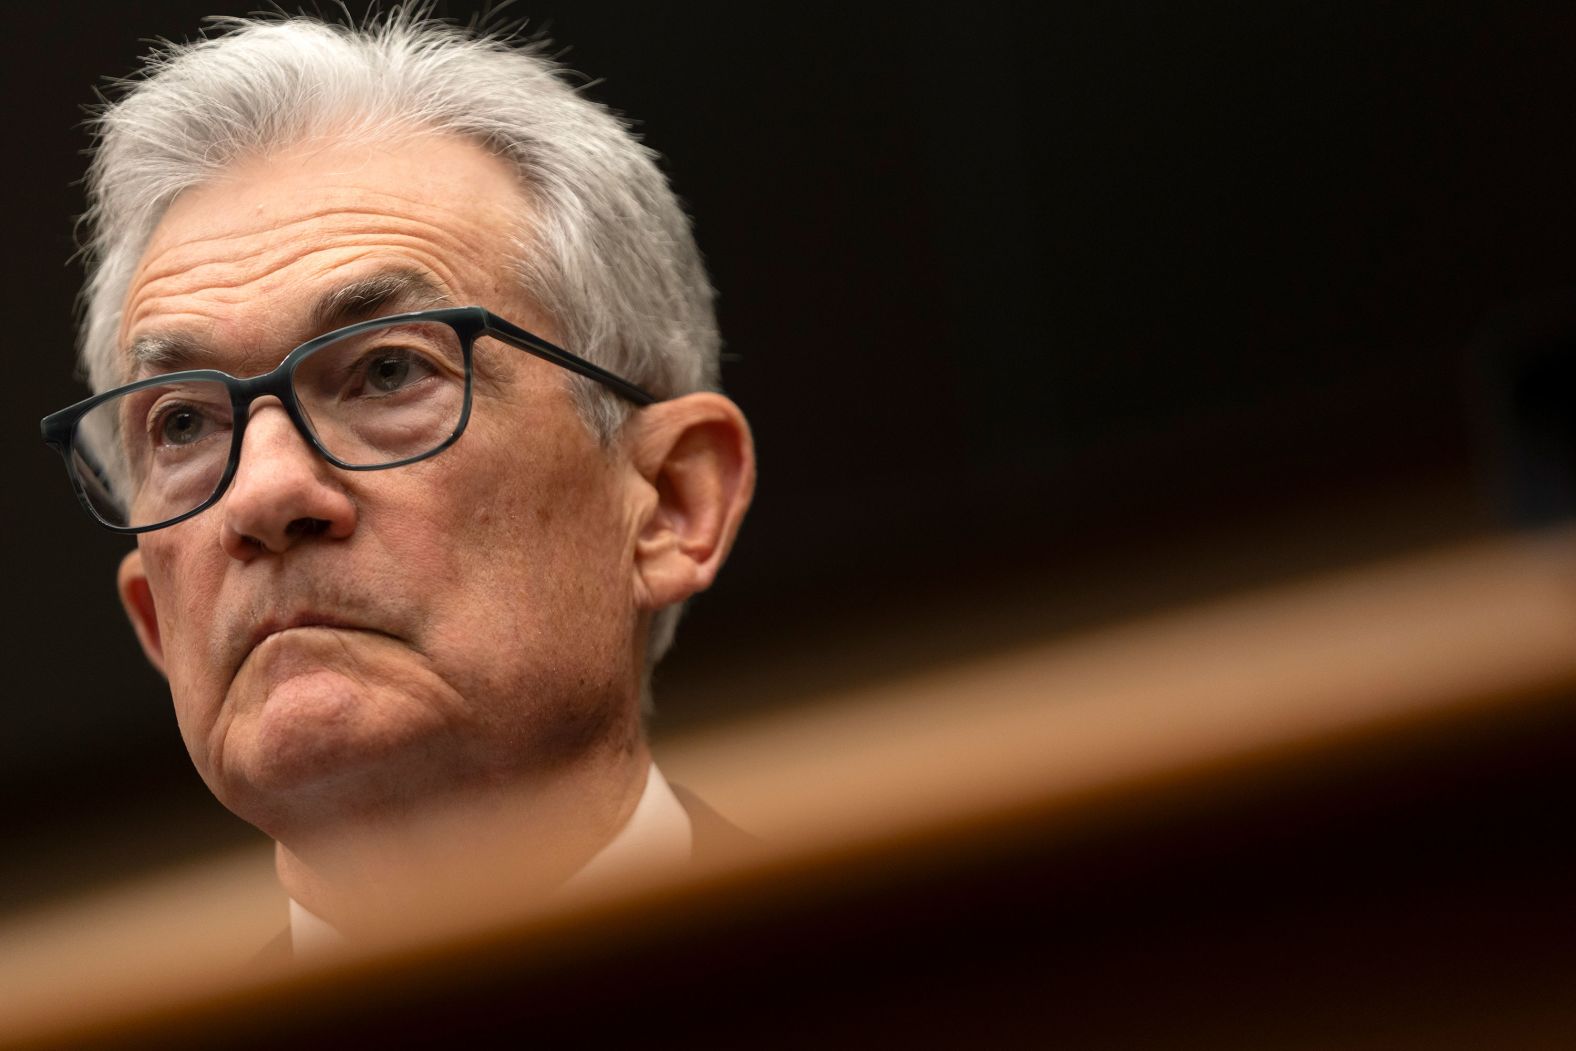 Federal Reserve Chair Jerome Powell appears before the House Financial Services Committee in Washington, DC, on Wednesday, March 6. <a href="index.php?page=&url=https%3A%2F%2Fwww.cnn.com%2Fbusiness%2Flive-news%2Fmarkets-fed-chair-powell-testimony-03-06-24%2Fh_814eb68304eb9d7d17d235e13e4337c7" target="_blank">In his testimony</a>, Powell continued to indicate that the fight against inflation is not over. He said that while he believes it will likely be appropriate to dial back interest rates sometime this year, the Fed still needs more confidence that inflation rates are moving towards the central bank's longterm goal of 2% before they pivot towards rate cuts.